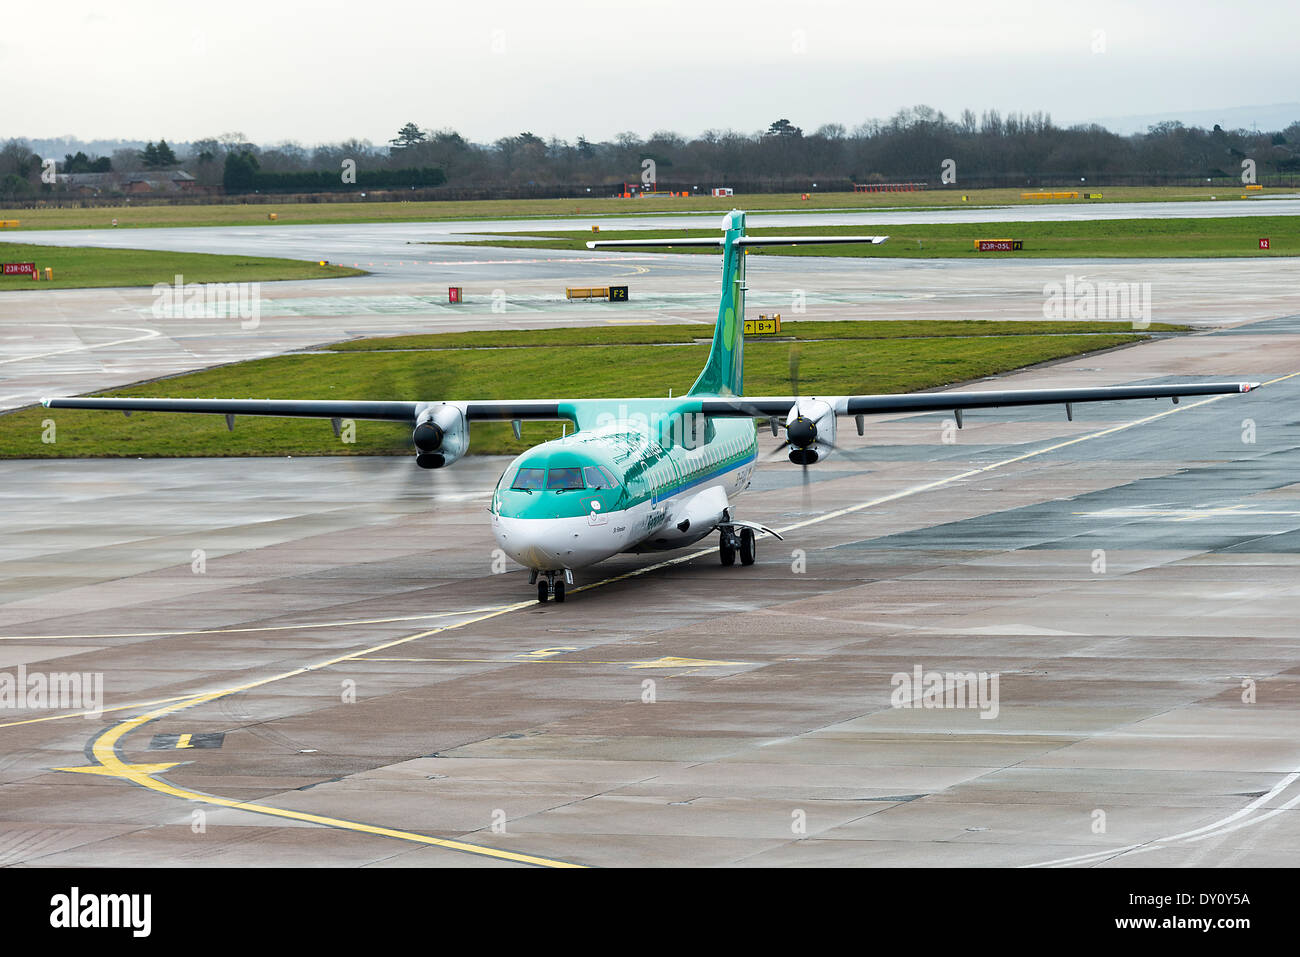 Aer Arann Operating in Aer Lingus Regional Airlines Colours ATR 72-600 Airliner EI-FAX Taxiing at Manchester Airport England UK Stock Photo